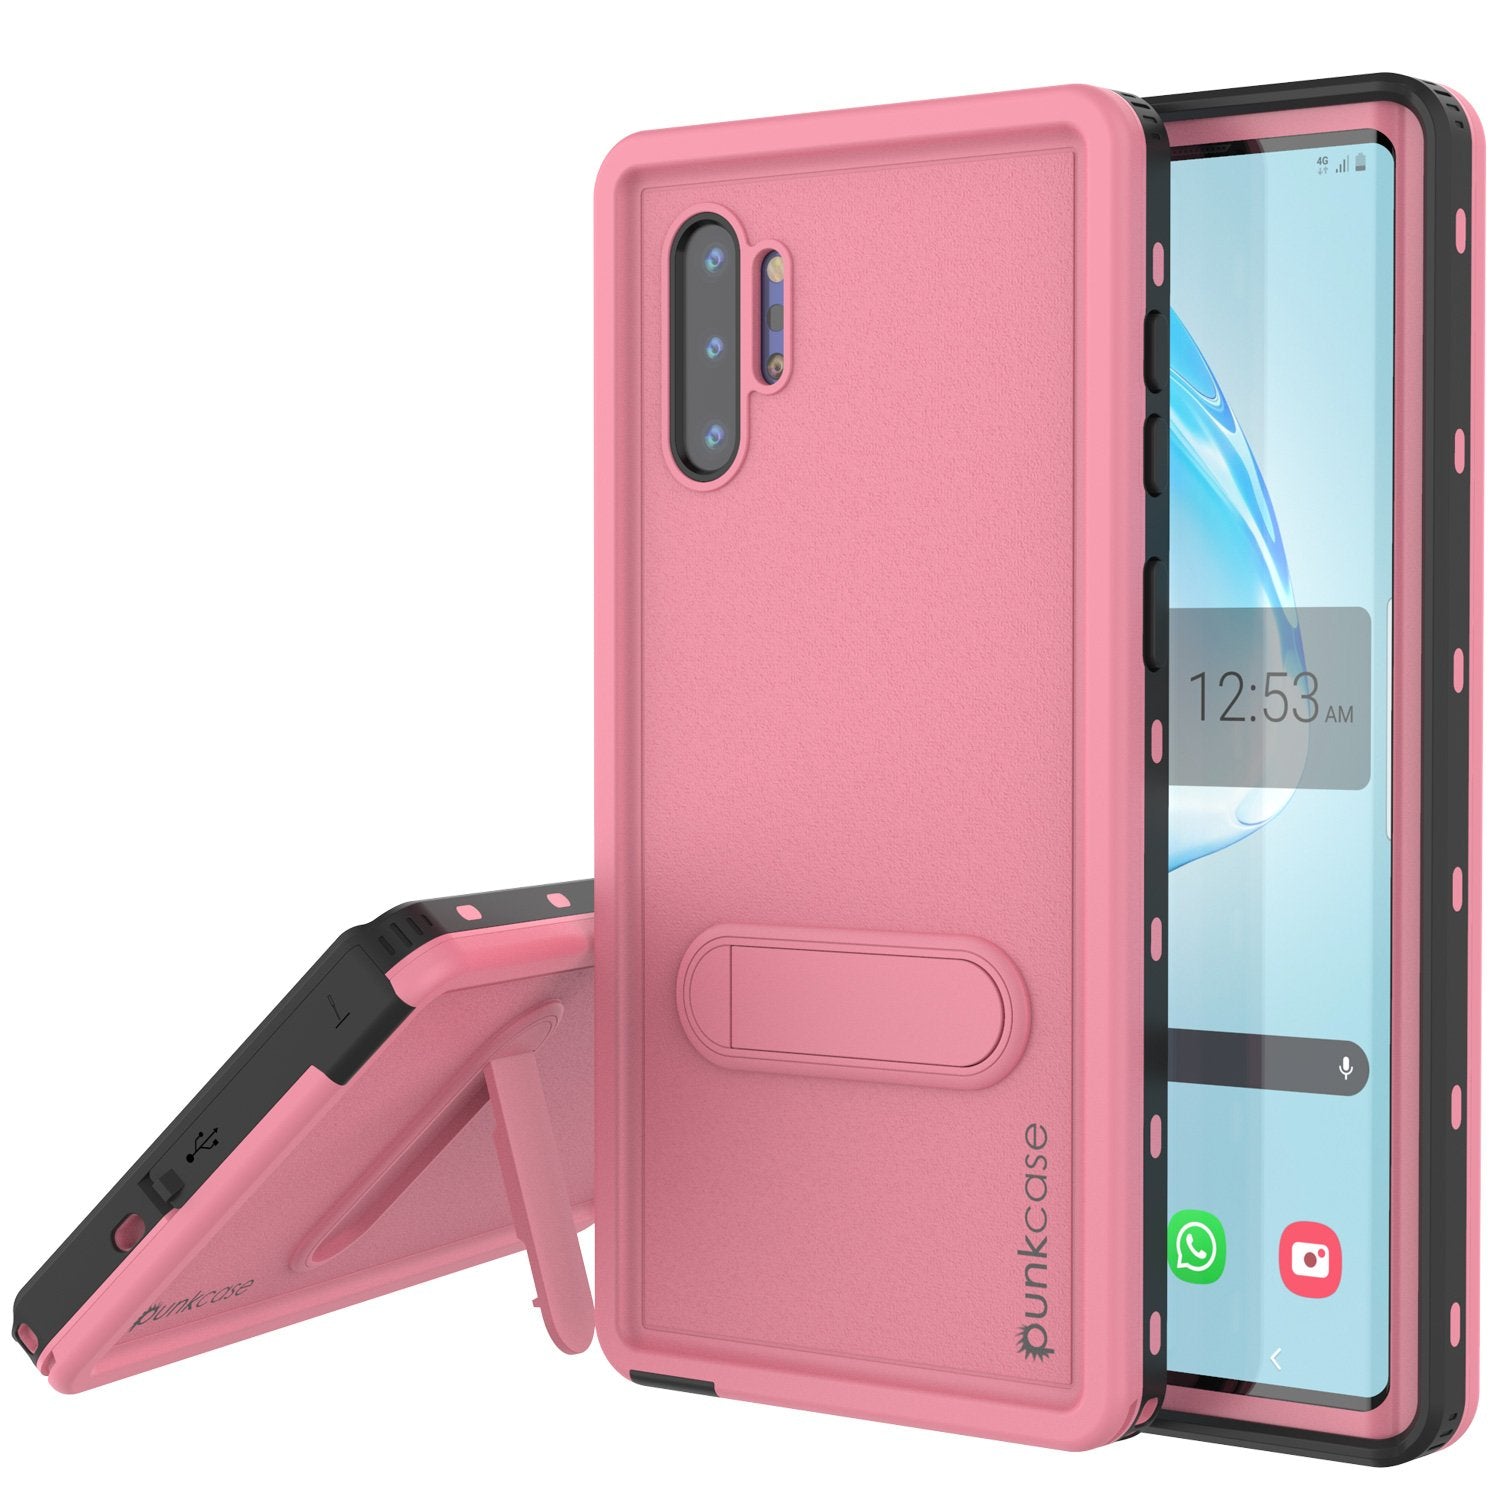 PunkCase Galaxy Note 10+ Plus Waterproof Case, [KickStud Series] Armor Cover [Pink] (Color in image: Pink)